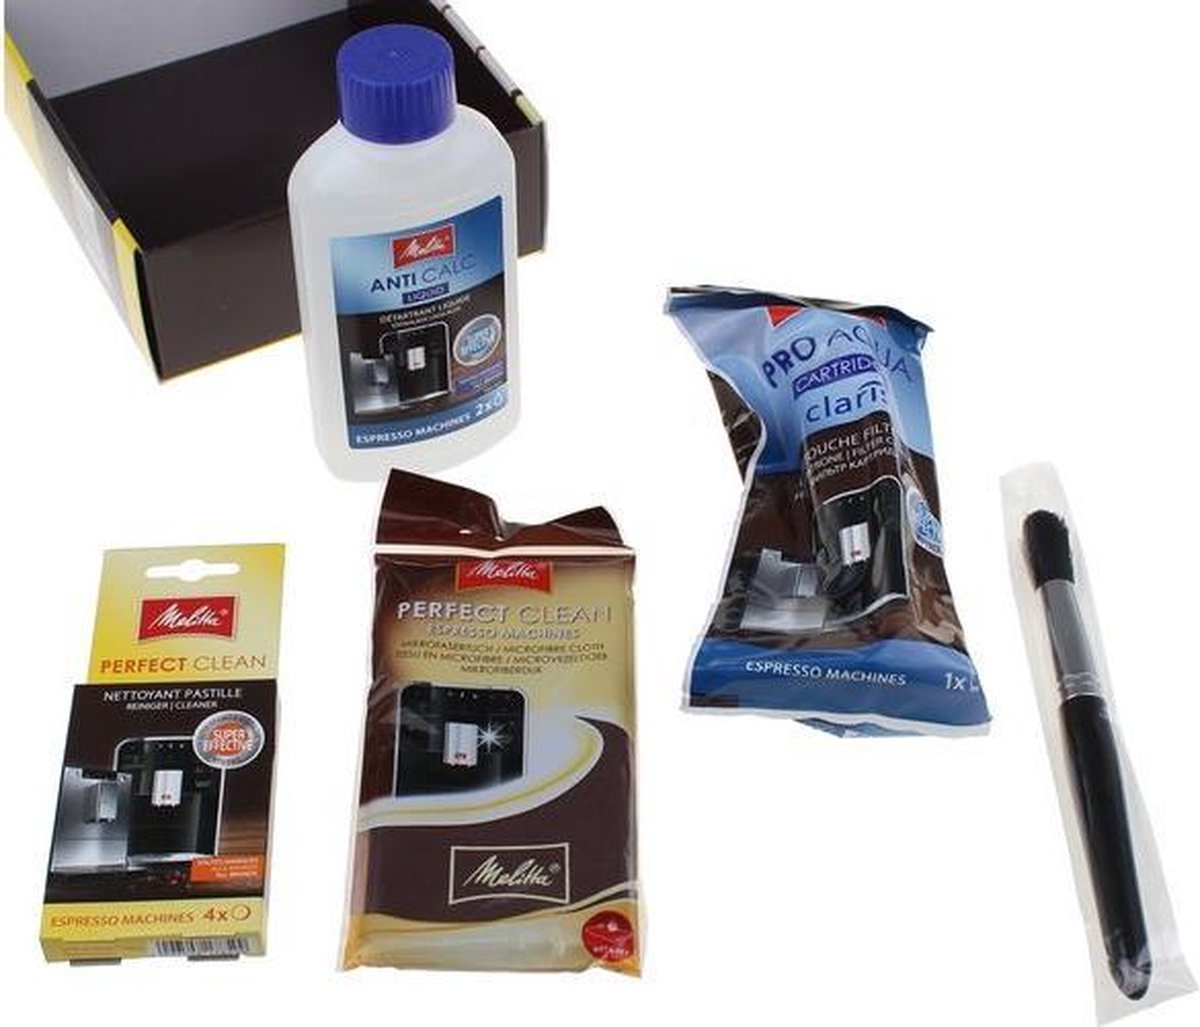 Perfect Clean Care Set for Melitta 